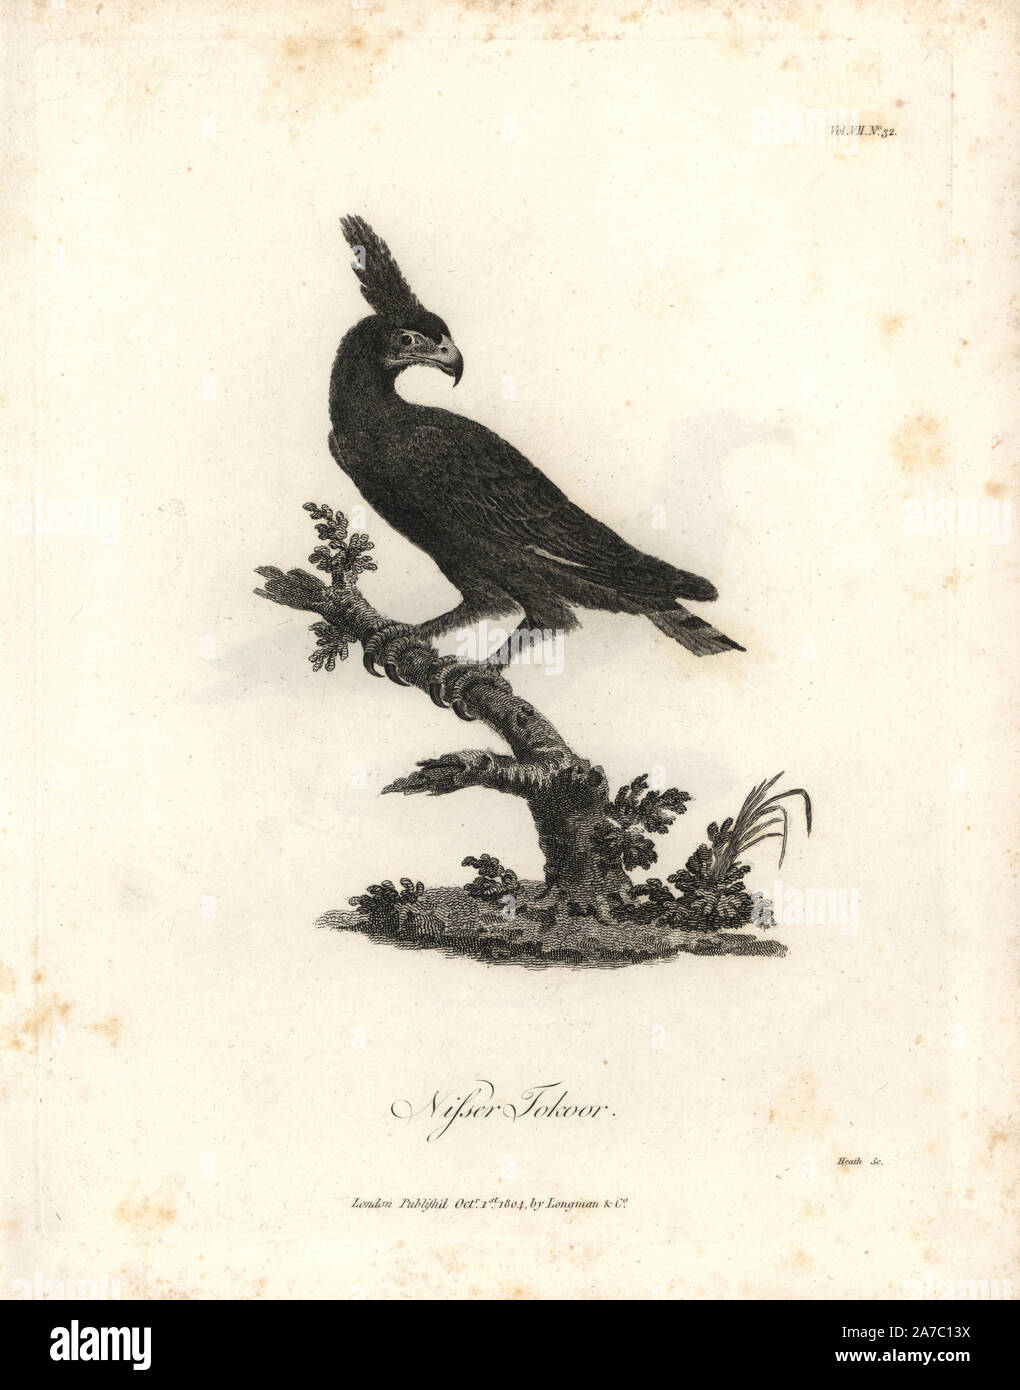 Nisser tokoor or long-crested eagle, Lophaetus occipitalis. Copperplate engraving from James Bruce's 'Travels to Discover the Source of the Nile, in the years 1768, 1769, 1770, 1771, 1772 and 1773,' London, 1790. James Bruce (1730-1794) was a Scottish explorer and travel writer who spent more than 12 years in North Africa and Ethiopia. Engraved by Heath after an original drawing by Bruce. Stock Photo